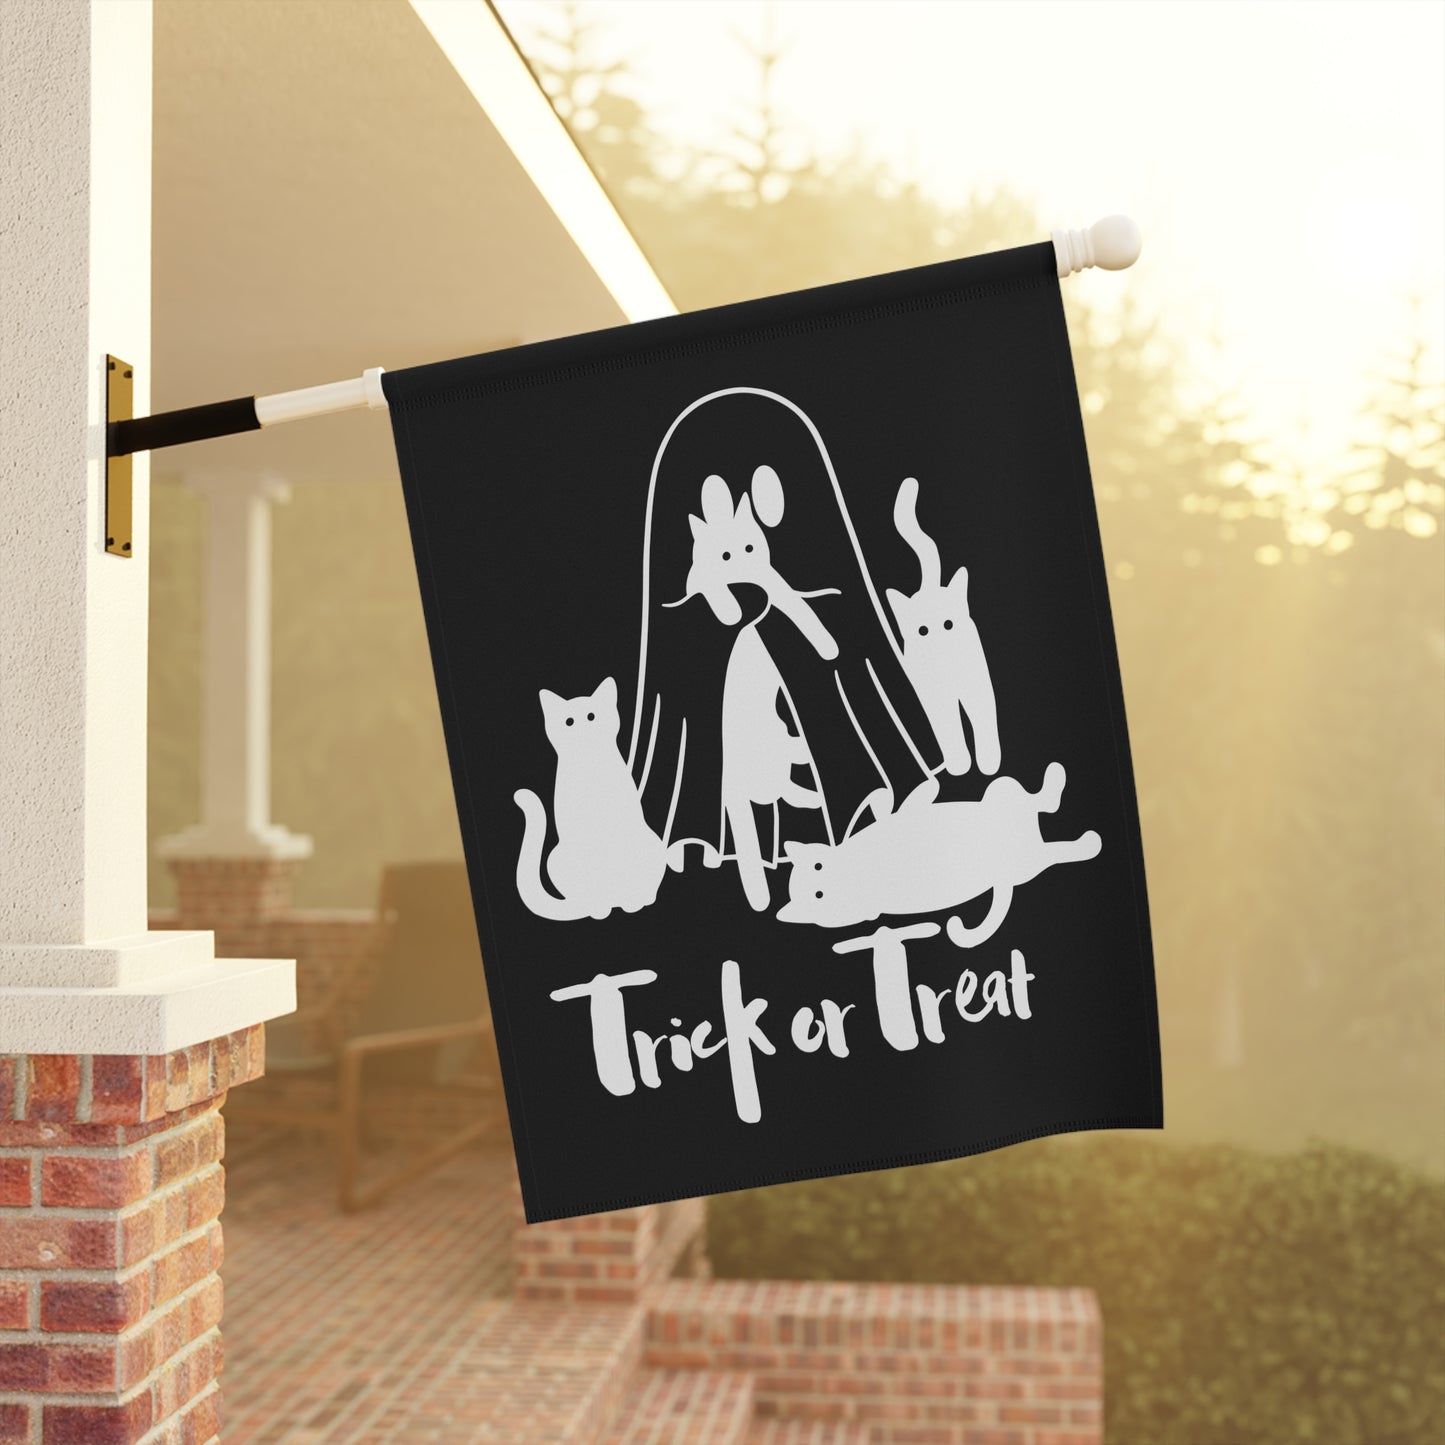 Ghost and Cats Halloween Garden & House Banner